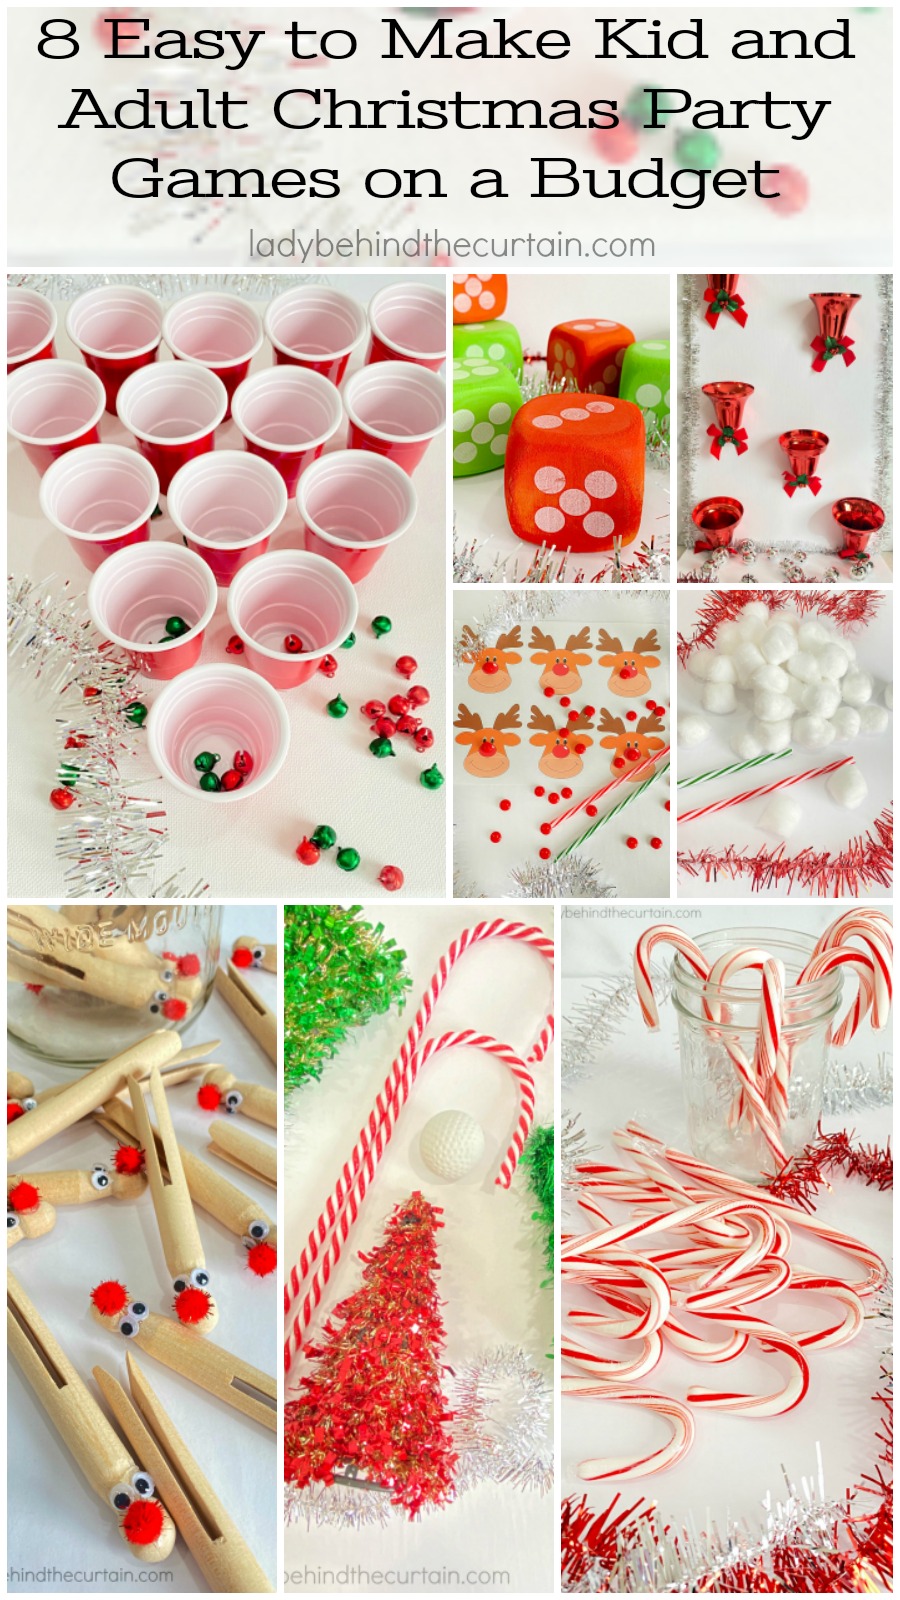 Spit Beg Tweet 8 Easy to Make Kid and Adult Christmas Party Games on a Budget